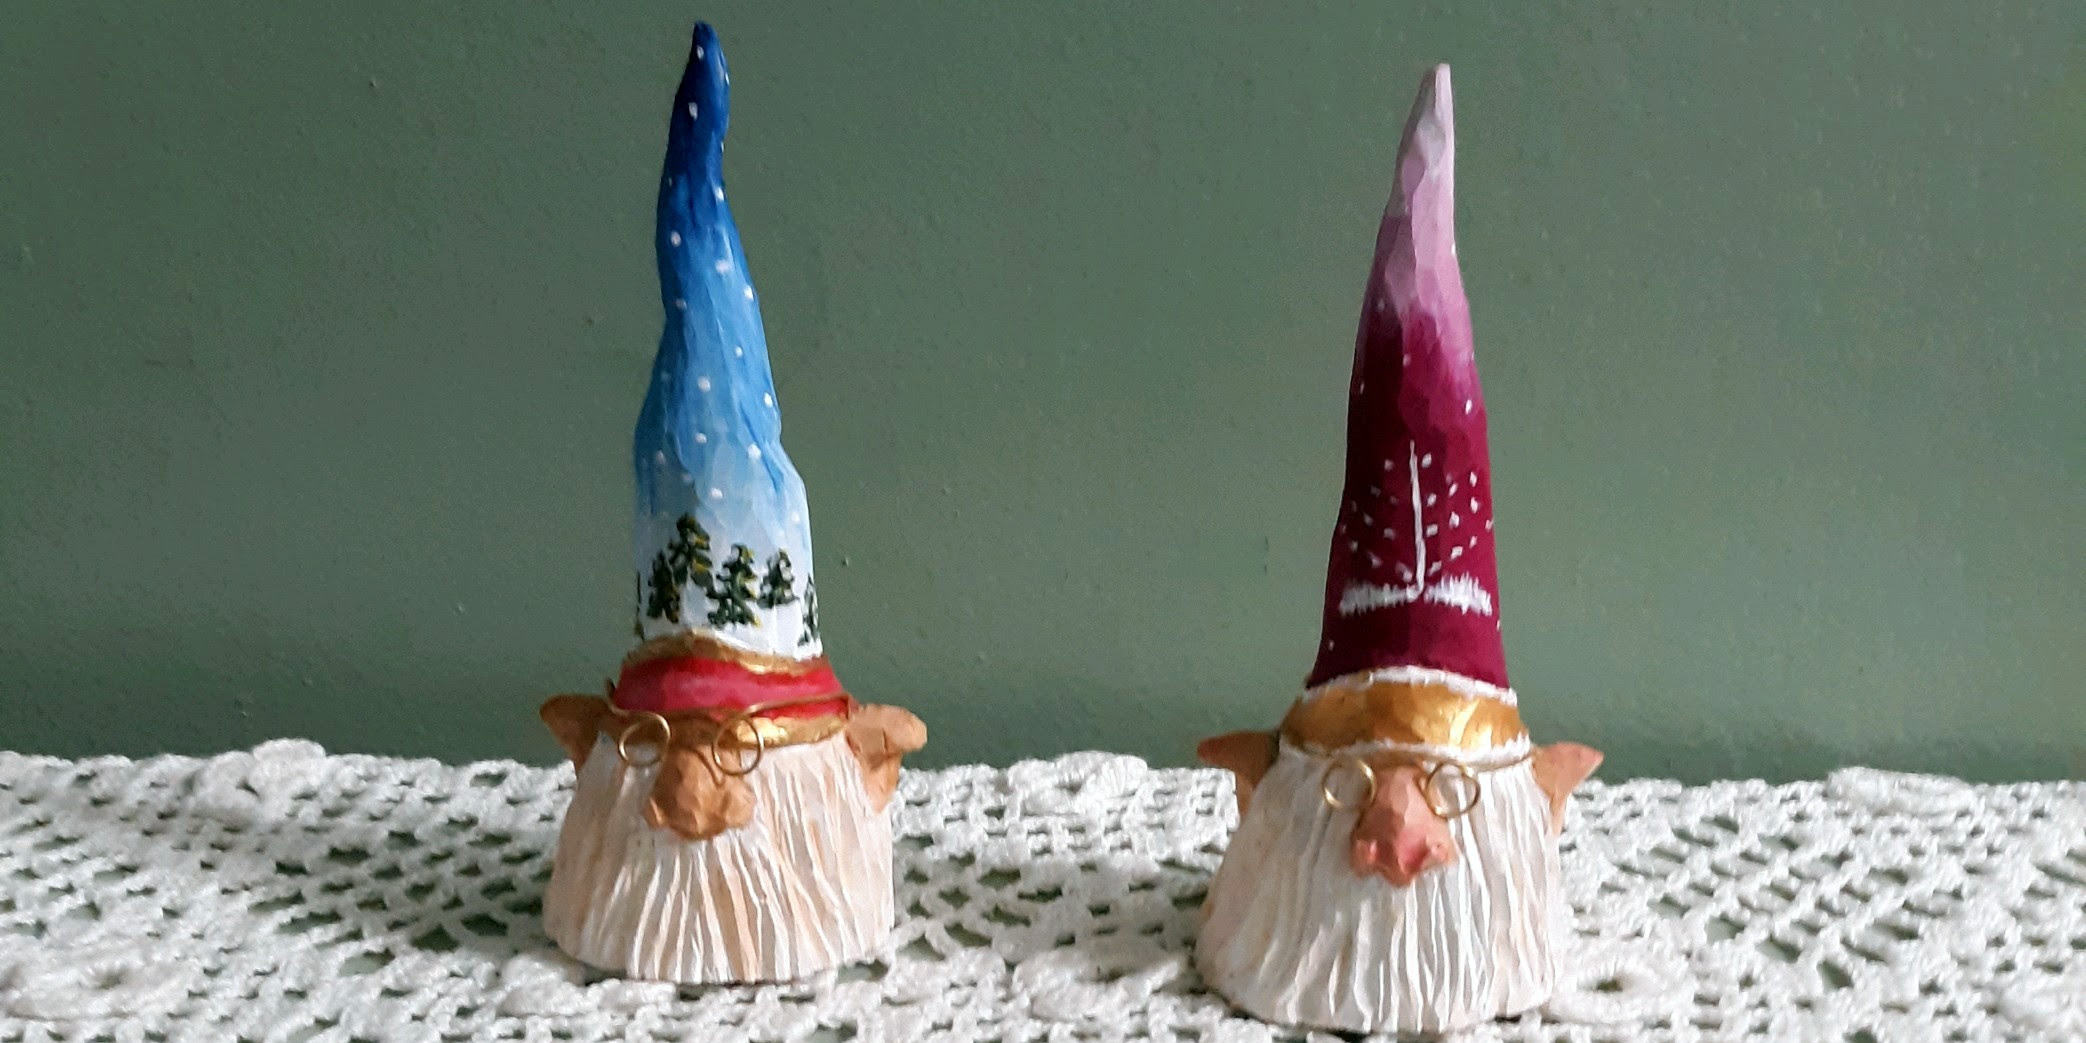 two carved wooden gnome-like faces under tall pointed and painted hats with winter motifs